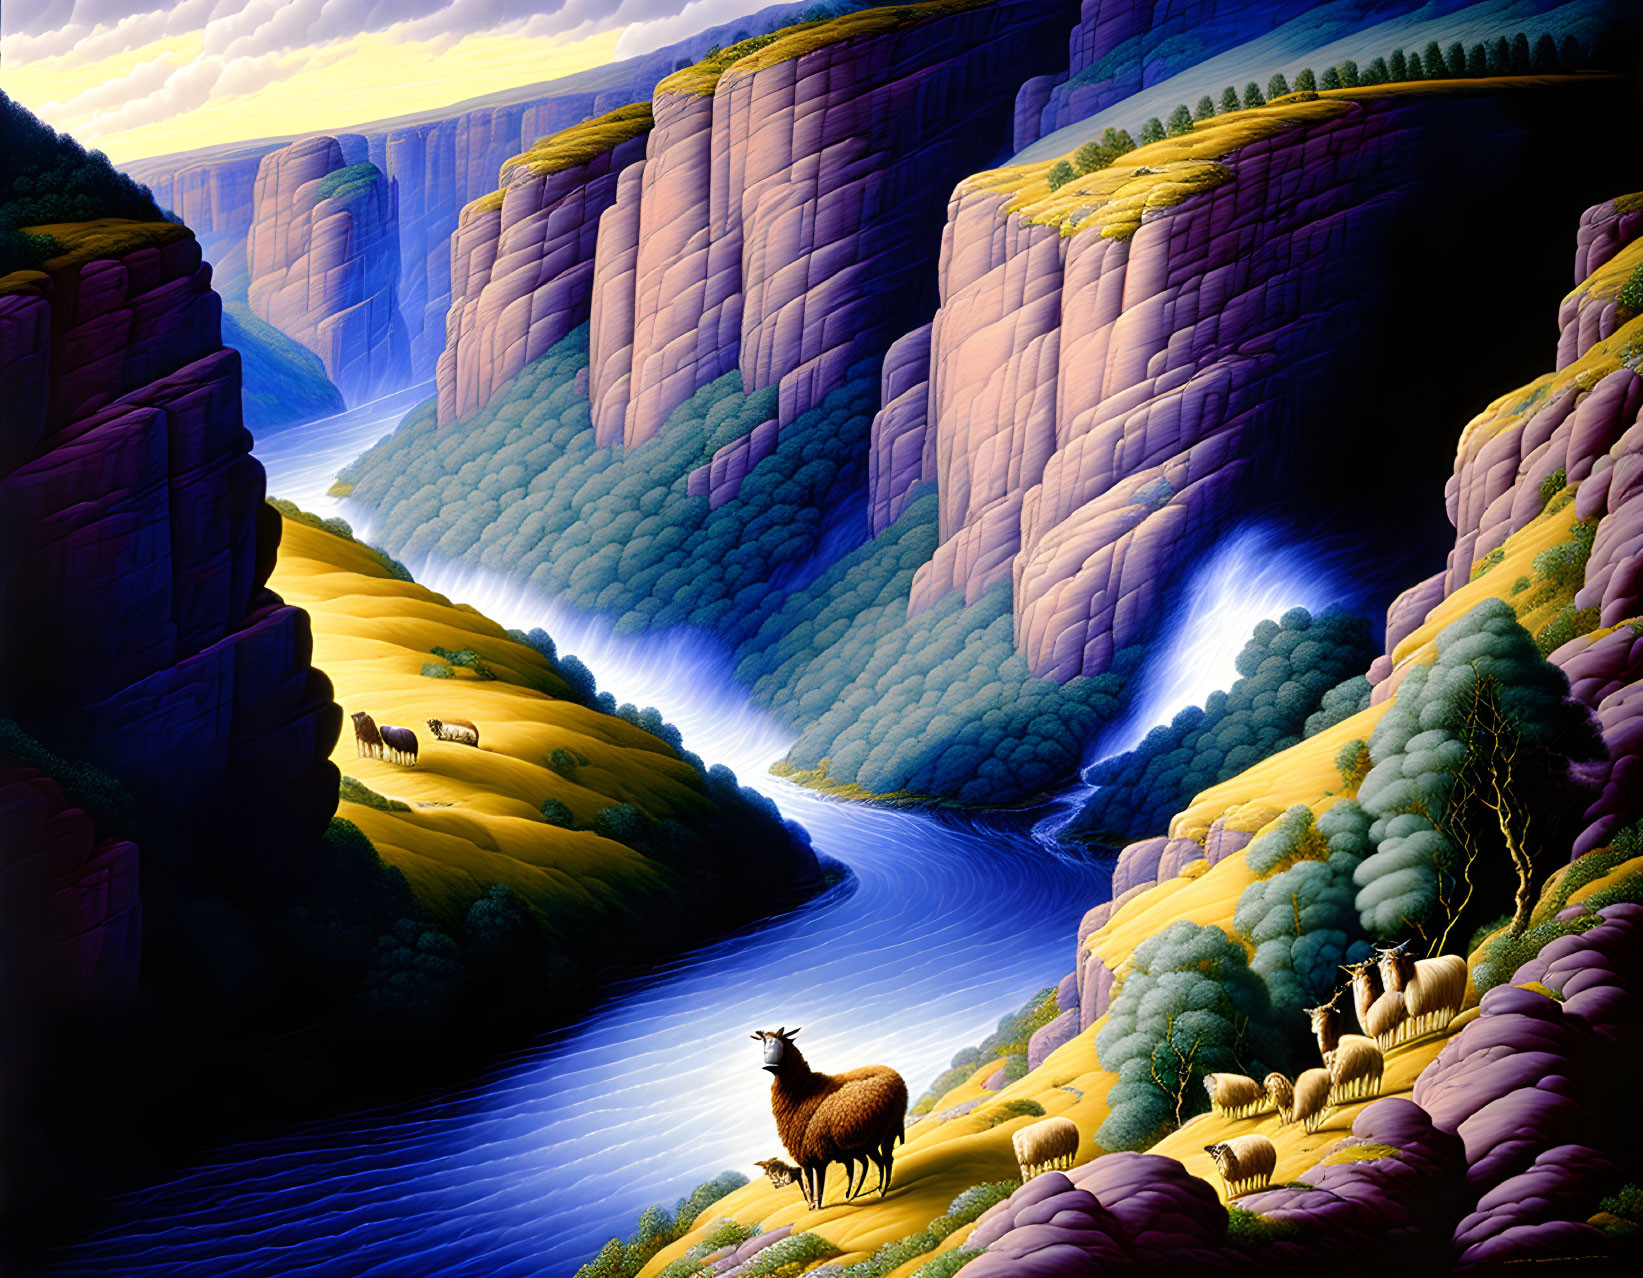 Fantastical landscape with river, cliffs, trees, and llama